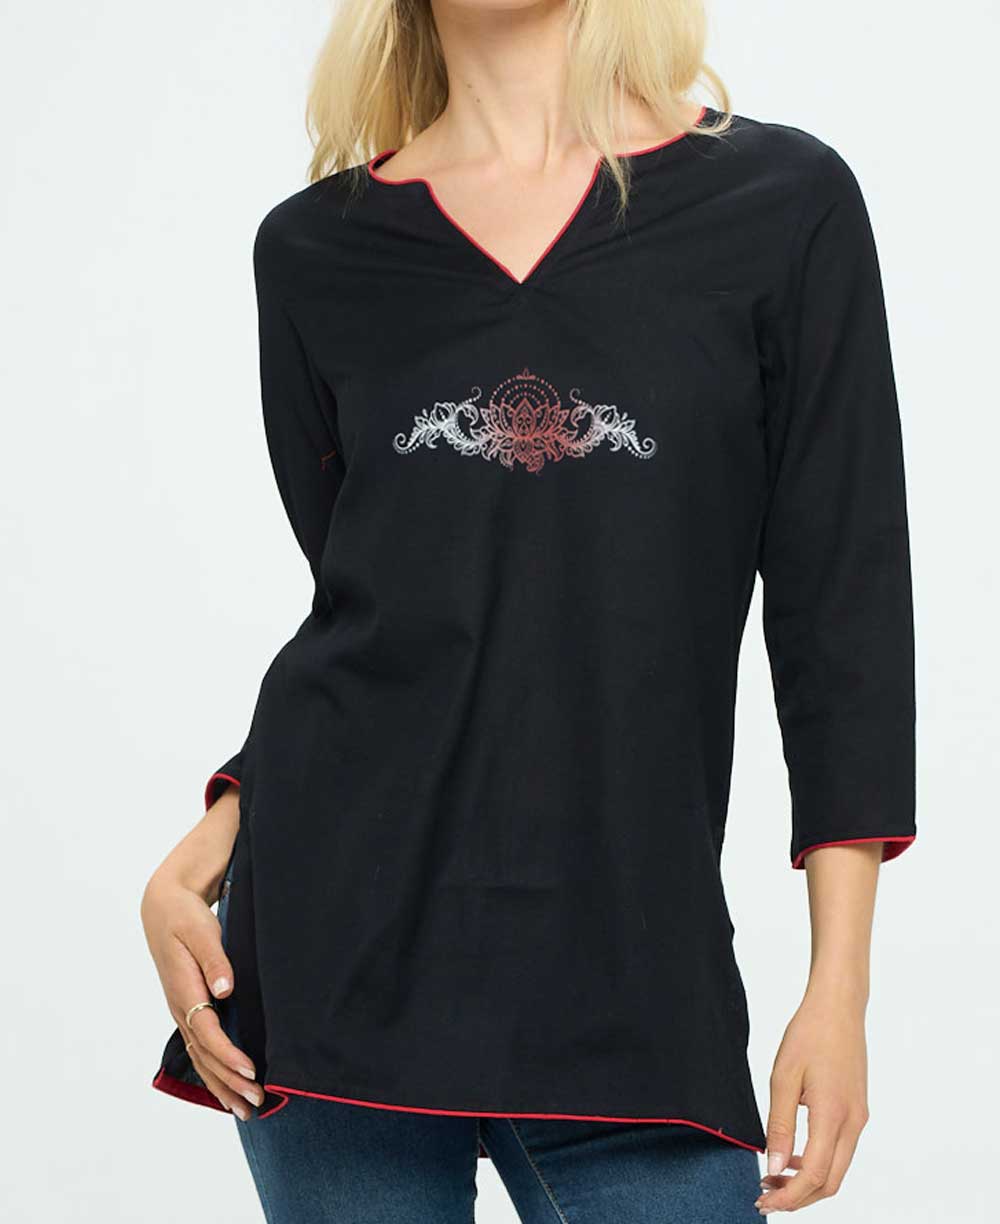 http://buddhagroove.com/cdn/shop/products/black-cotton-tunic-top-with-meaningful-lotus-design-s-active-apparel-784033.jpg?v=1705807708